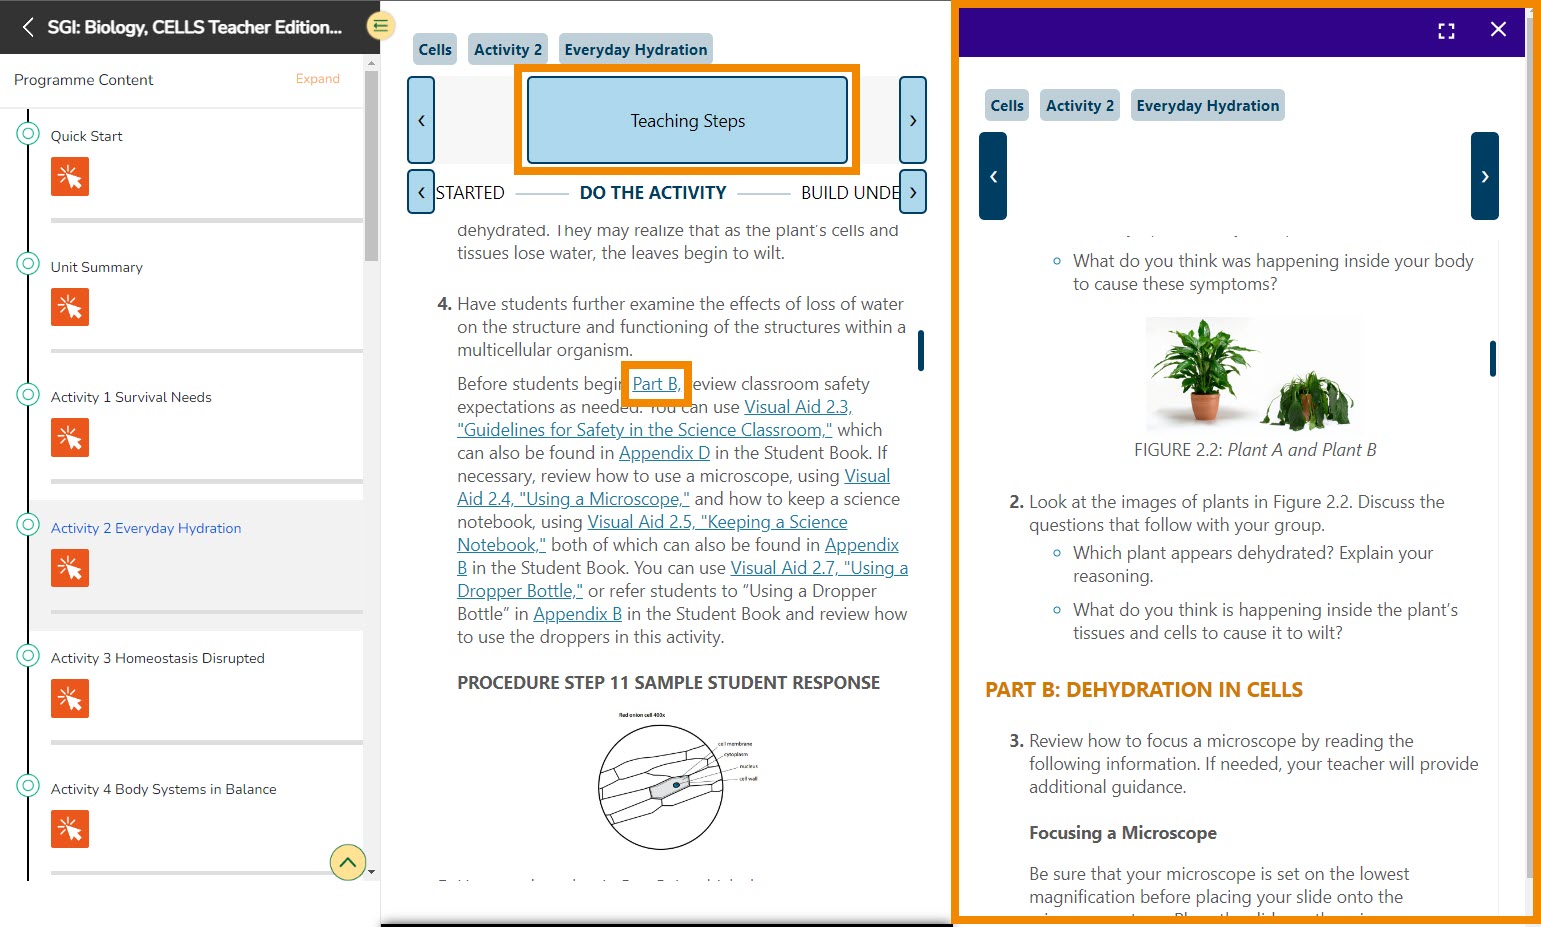 Clicking on links to the student book will open a specific section of the student book in a side-by-side window.